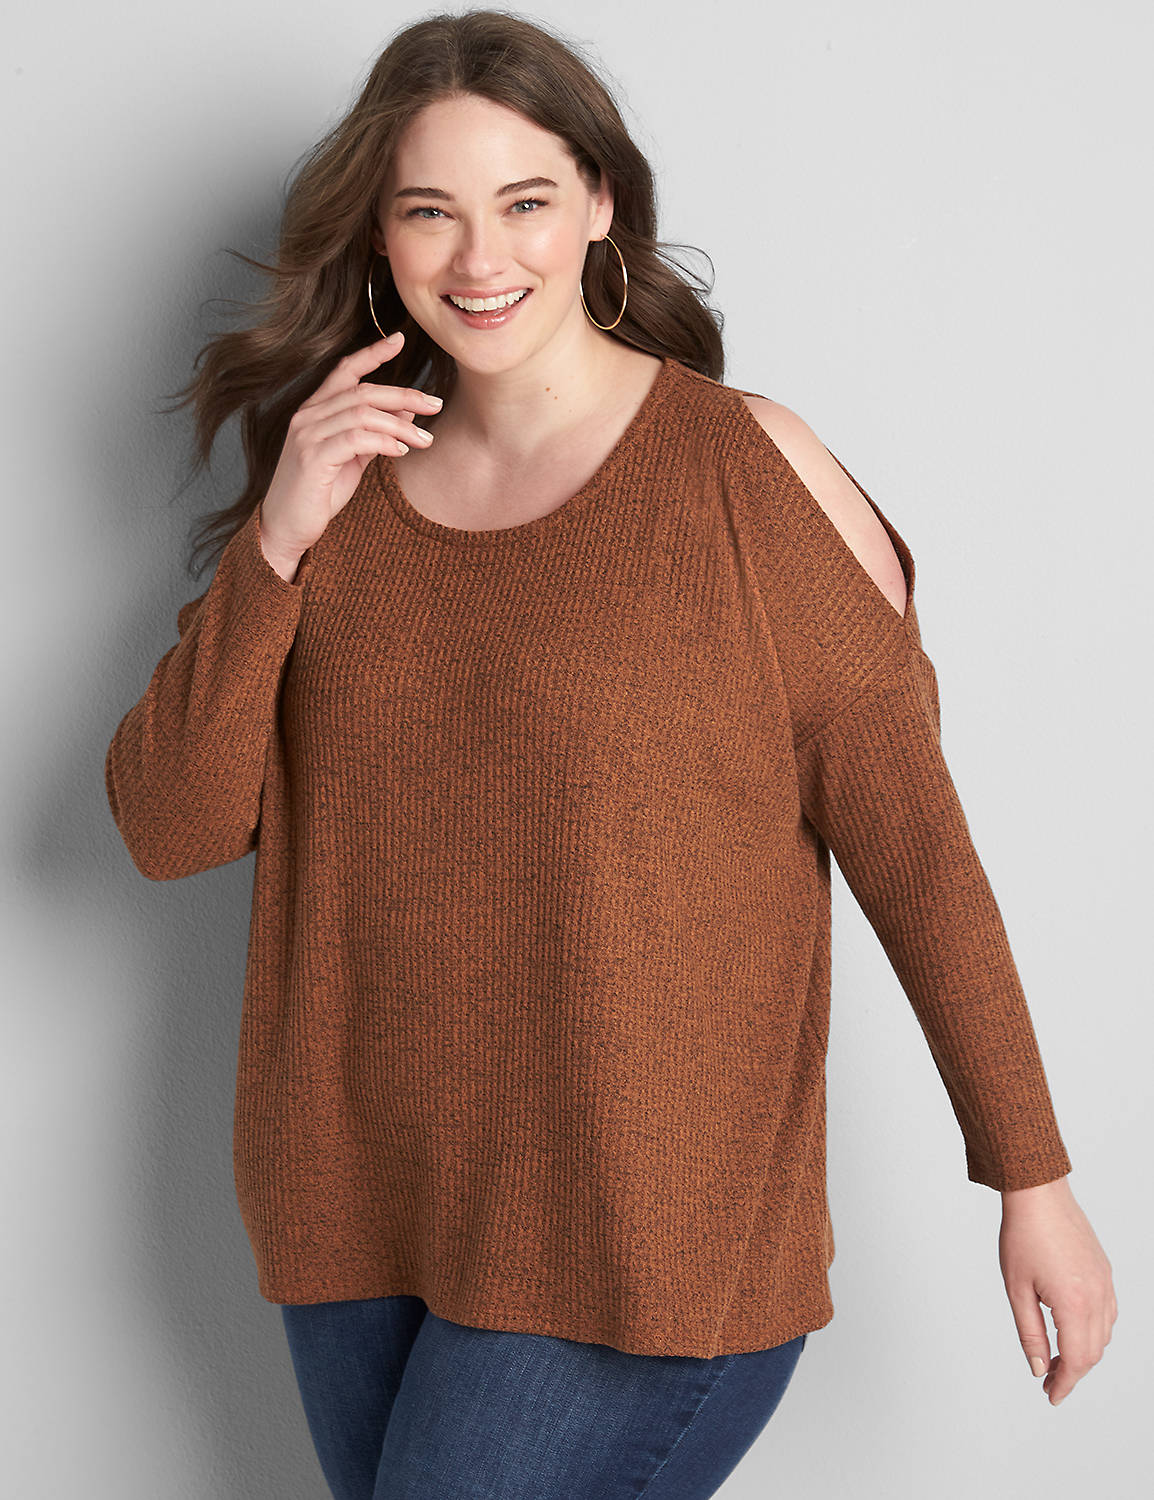 Long Sleeve Open Crew Neck With Cutout Shoulders In Brushed Waffle 1121911:PANTONE Argan Oil:14/16 Product Image 1